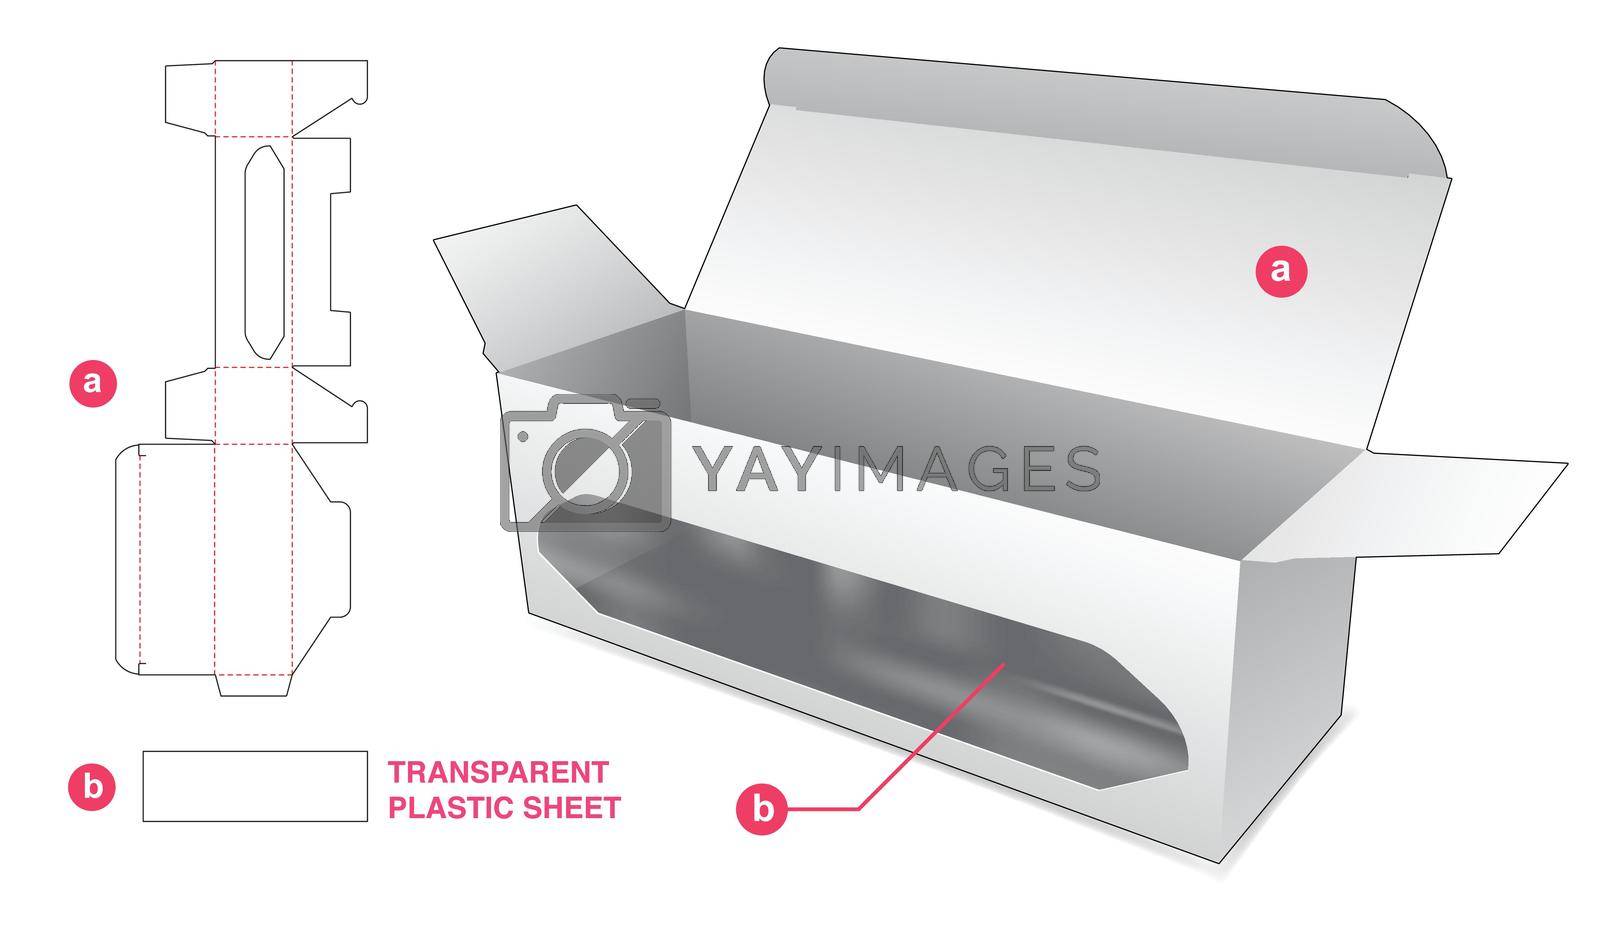 Royalty free image of Cardboard short box with window and transparent plastic sheet die cut template by valueinvestor